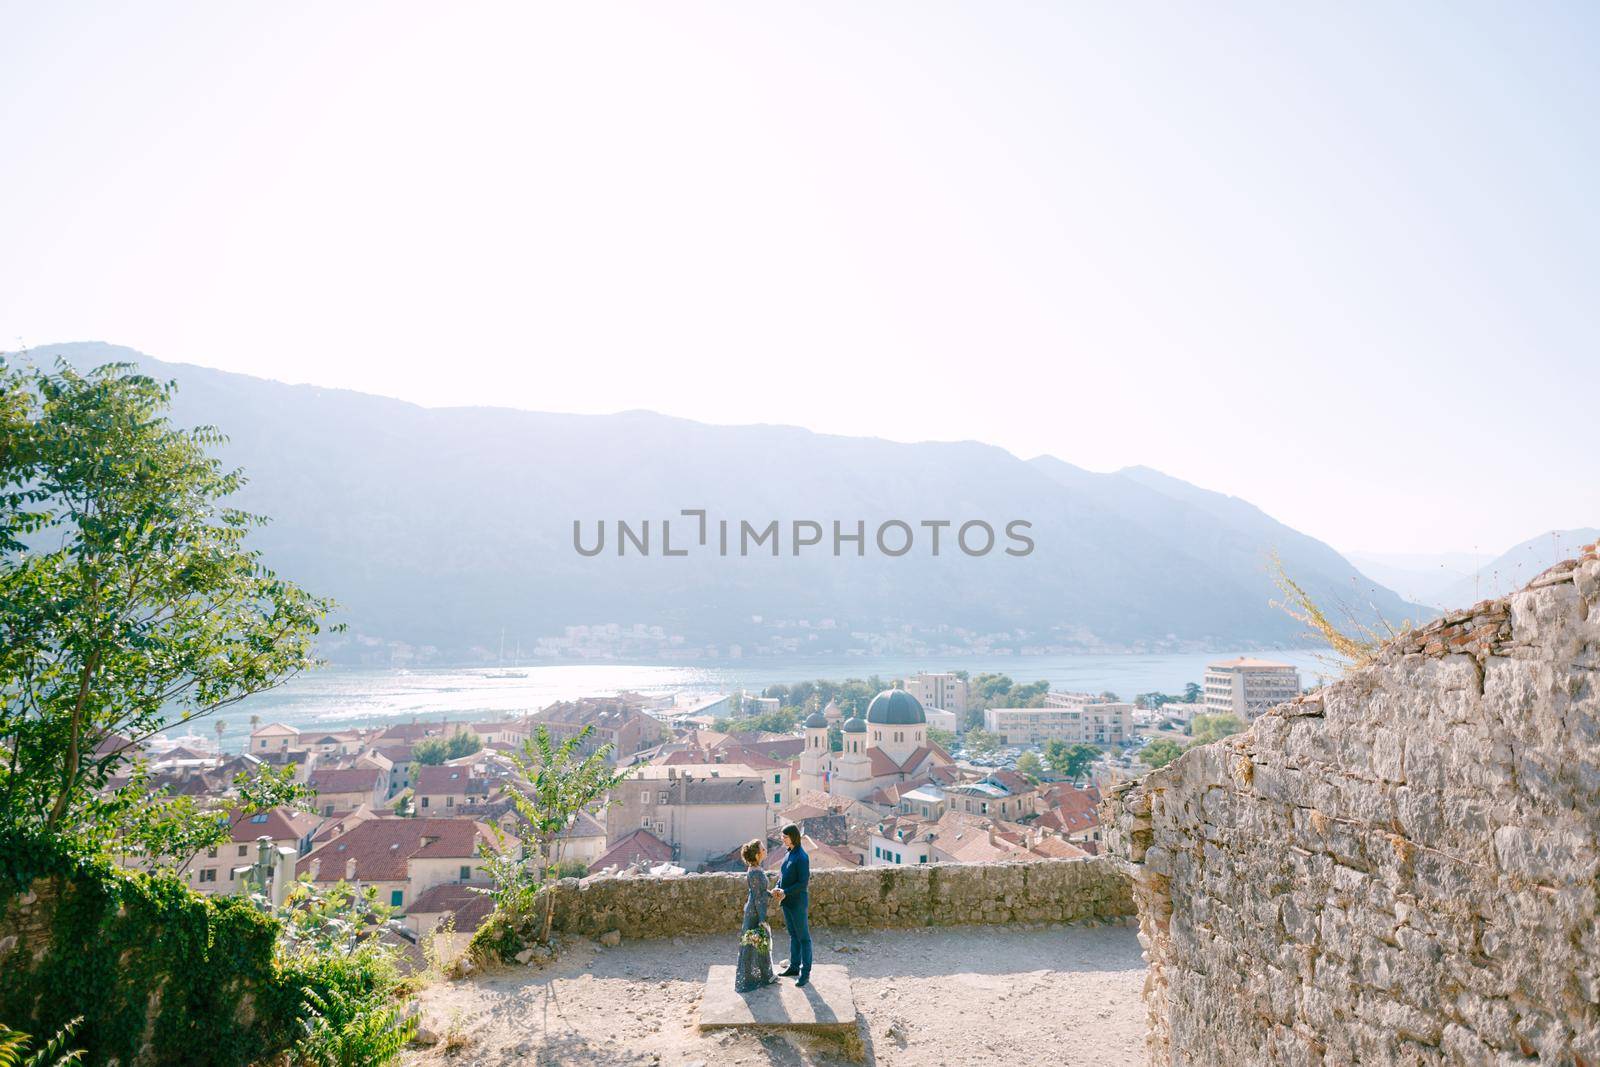 The bride and groom hug on the observation deck with a picturesque view of the old town of Kotor and the Bay of Kotor . High quality photo